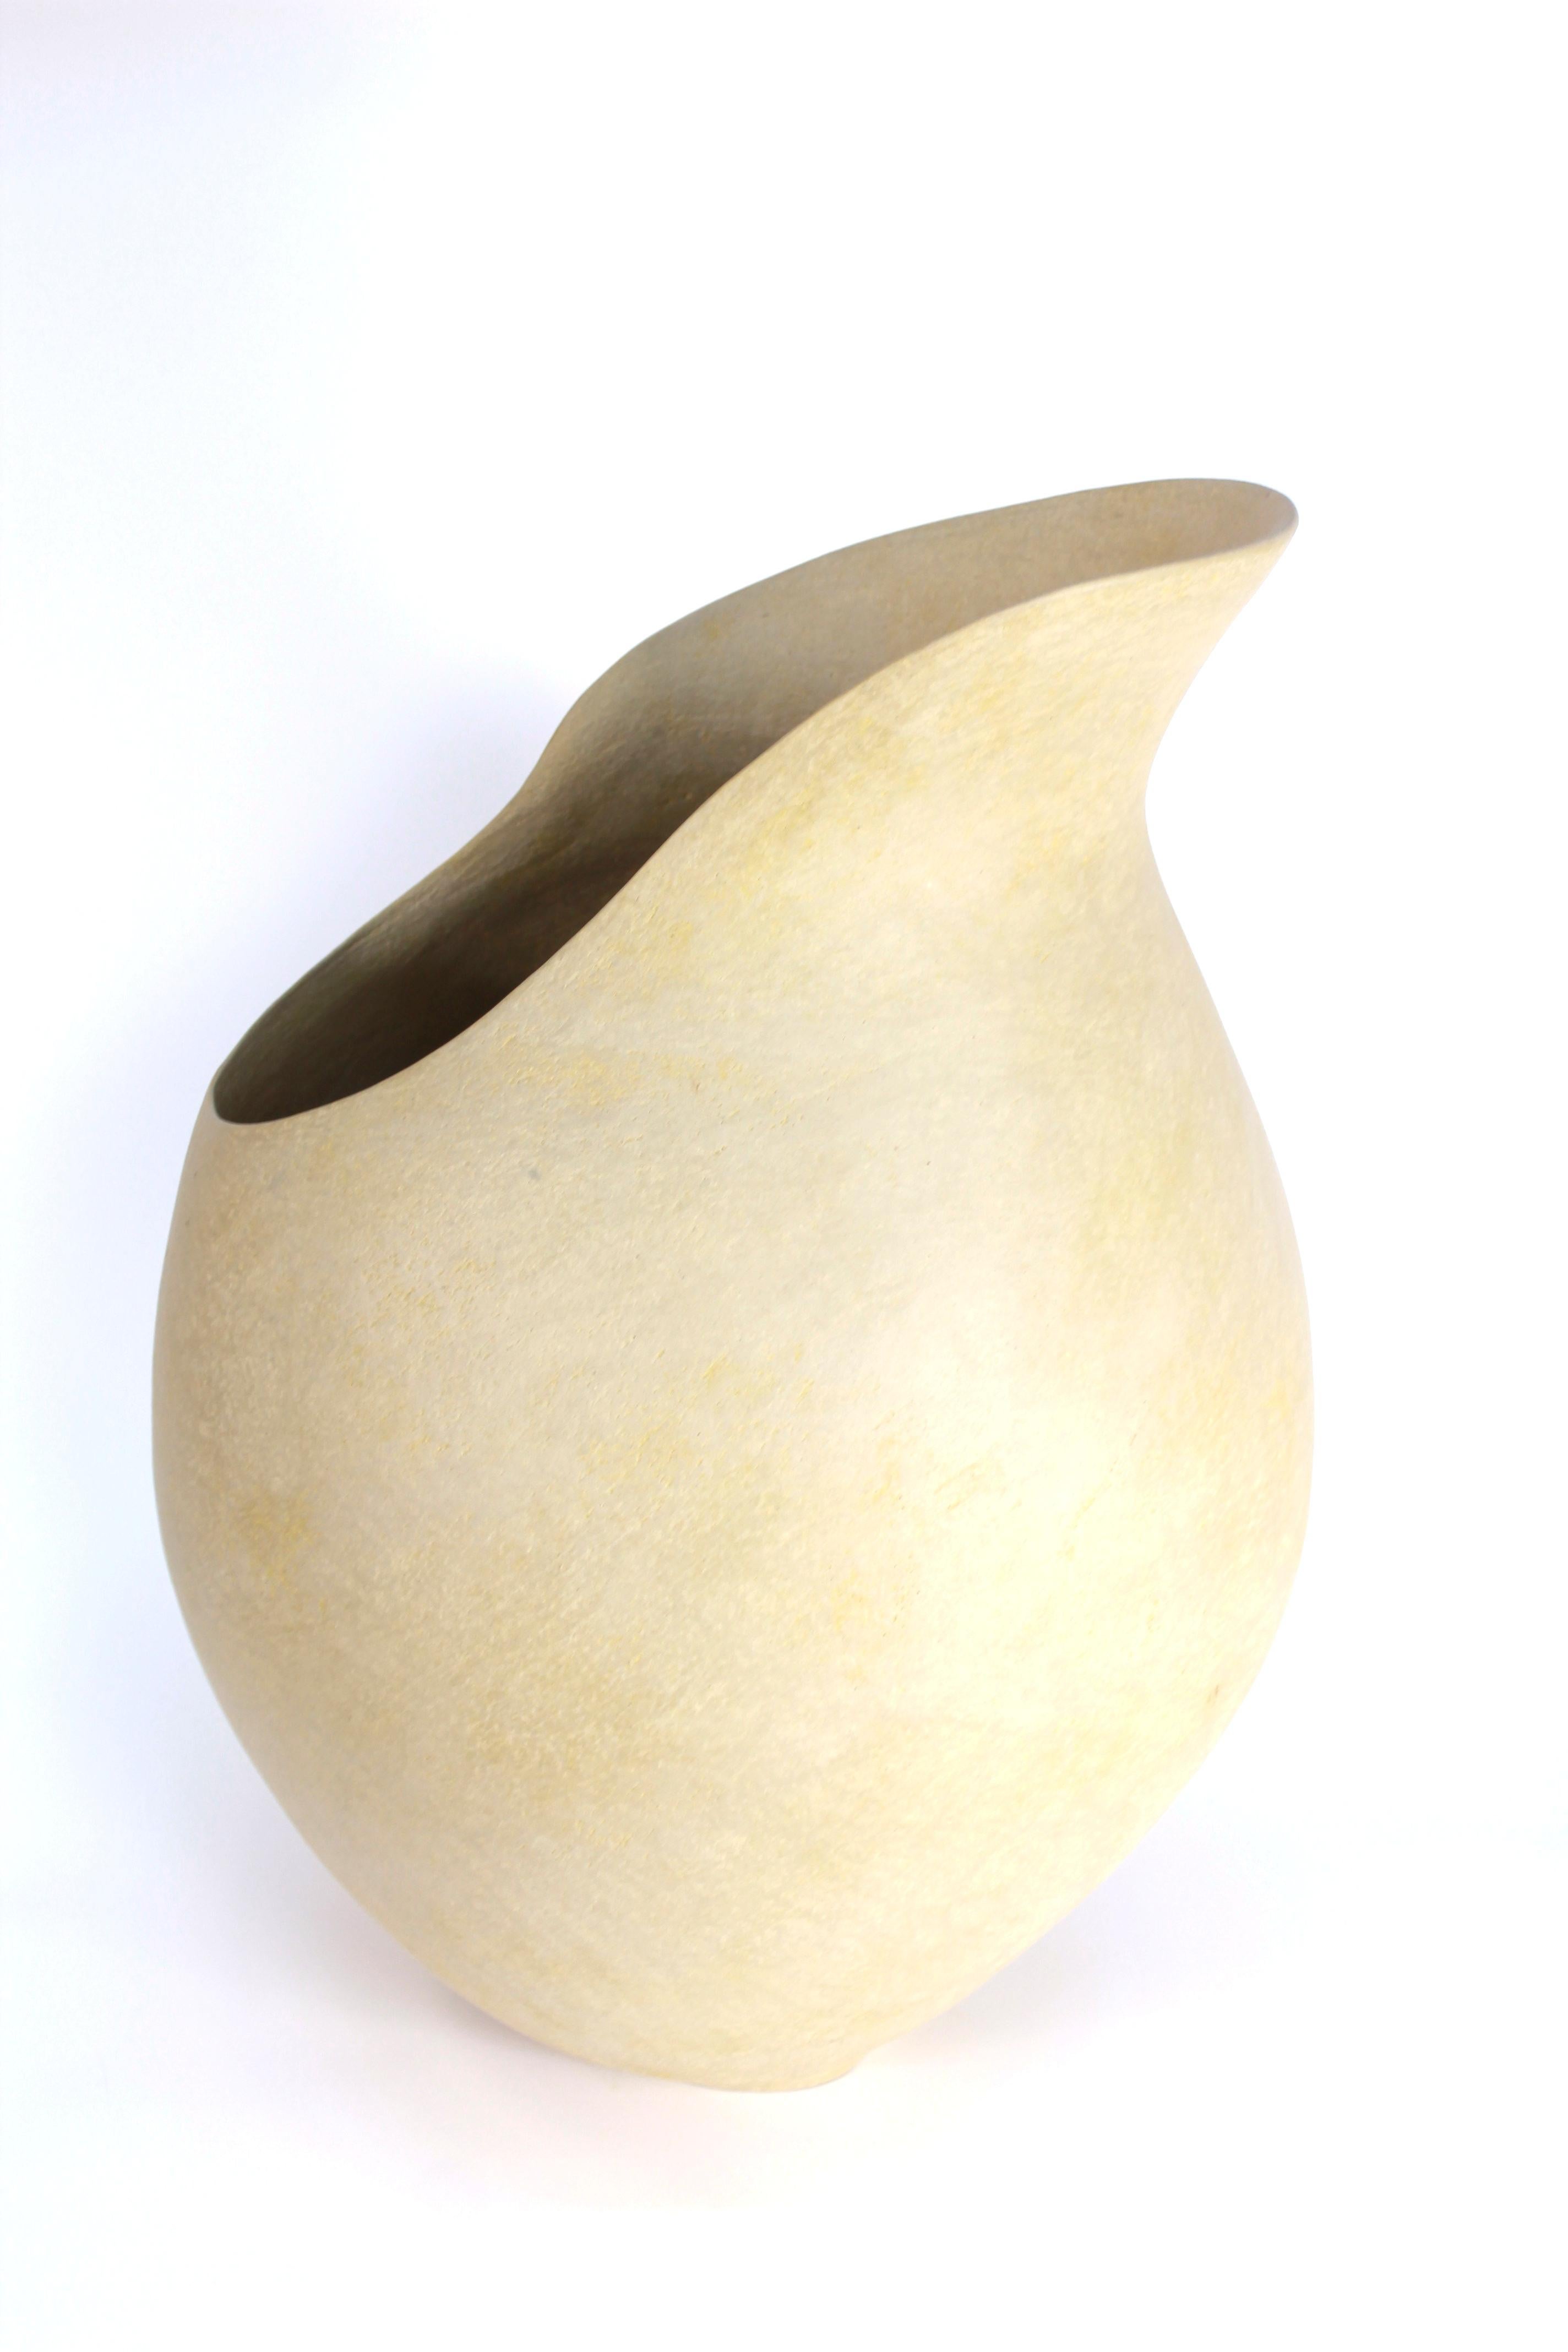 One-of-a-kind large contemporary brutalist beige ceramic jar handmade by award-winning Zélie Rouby. Made of a gritty 